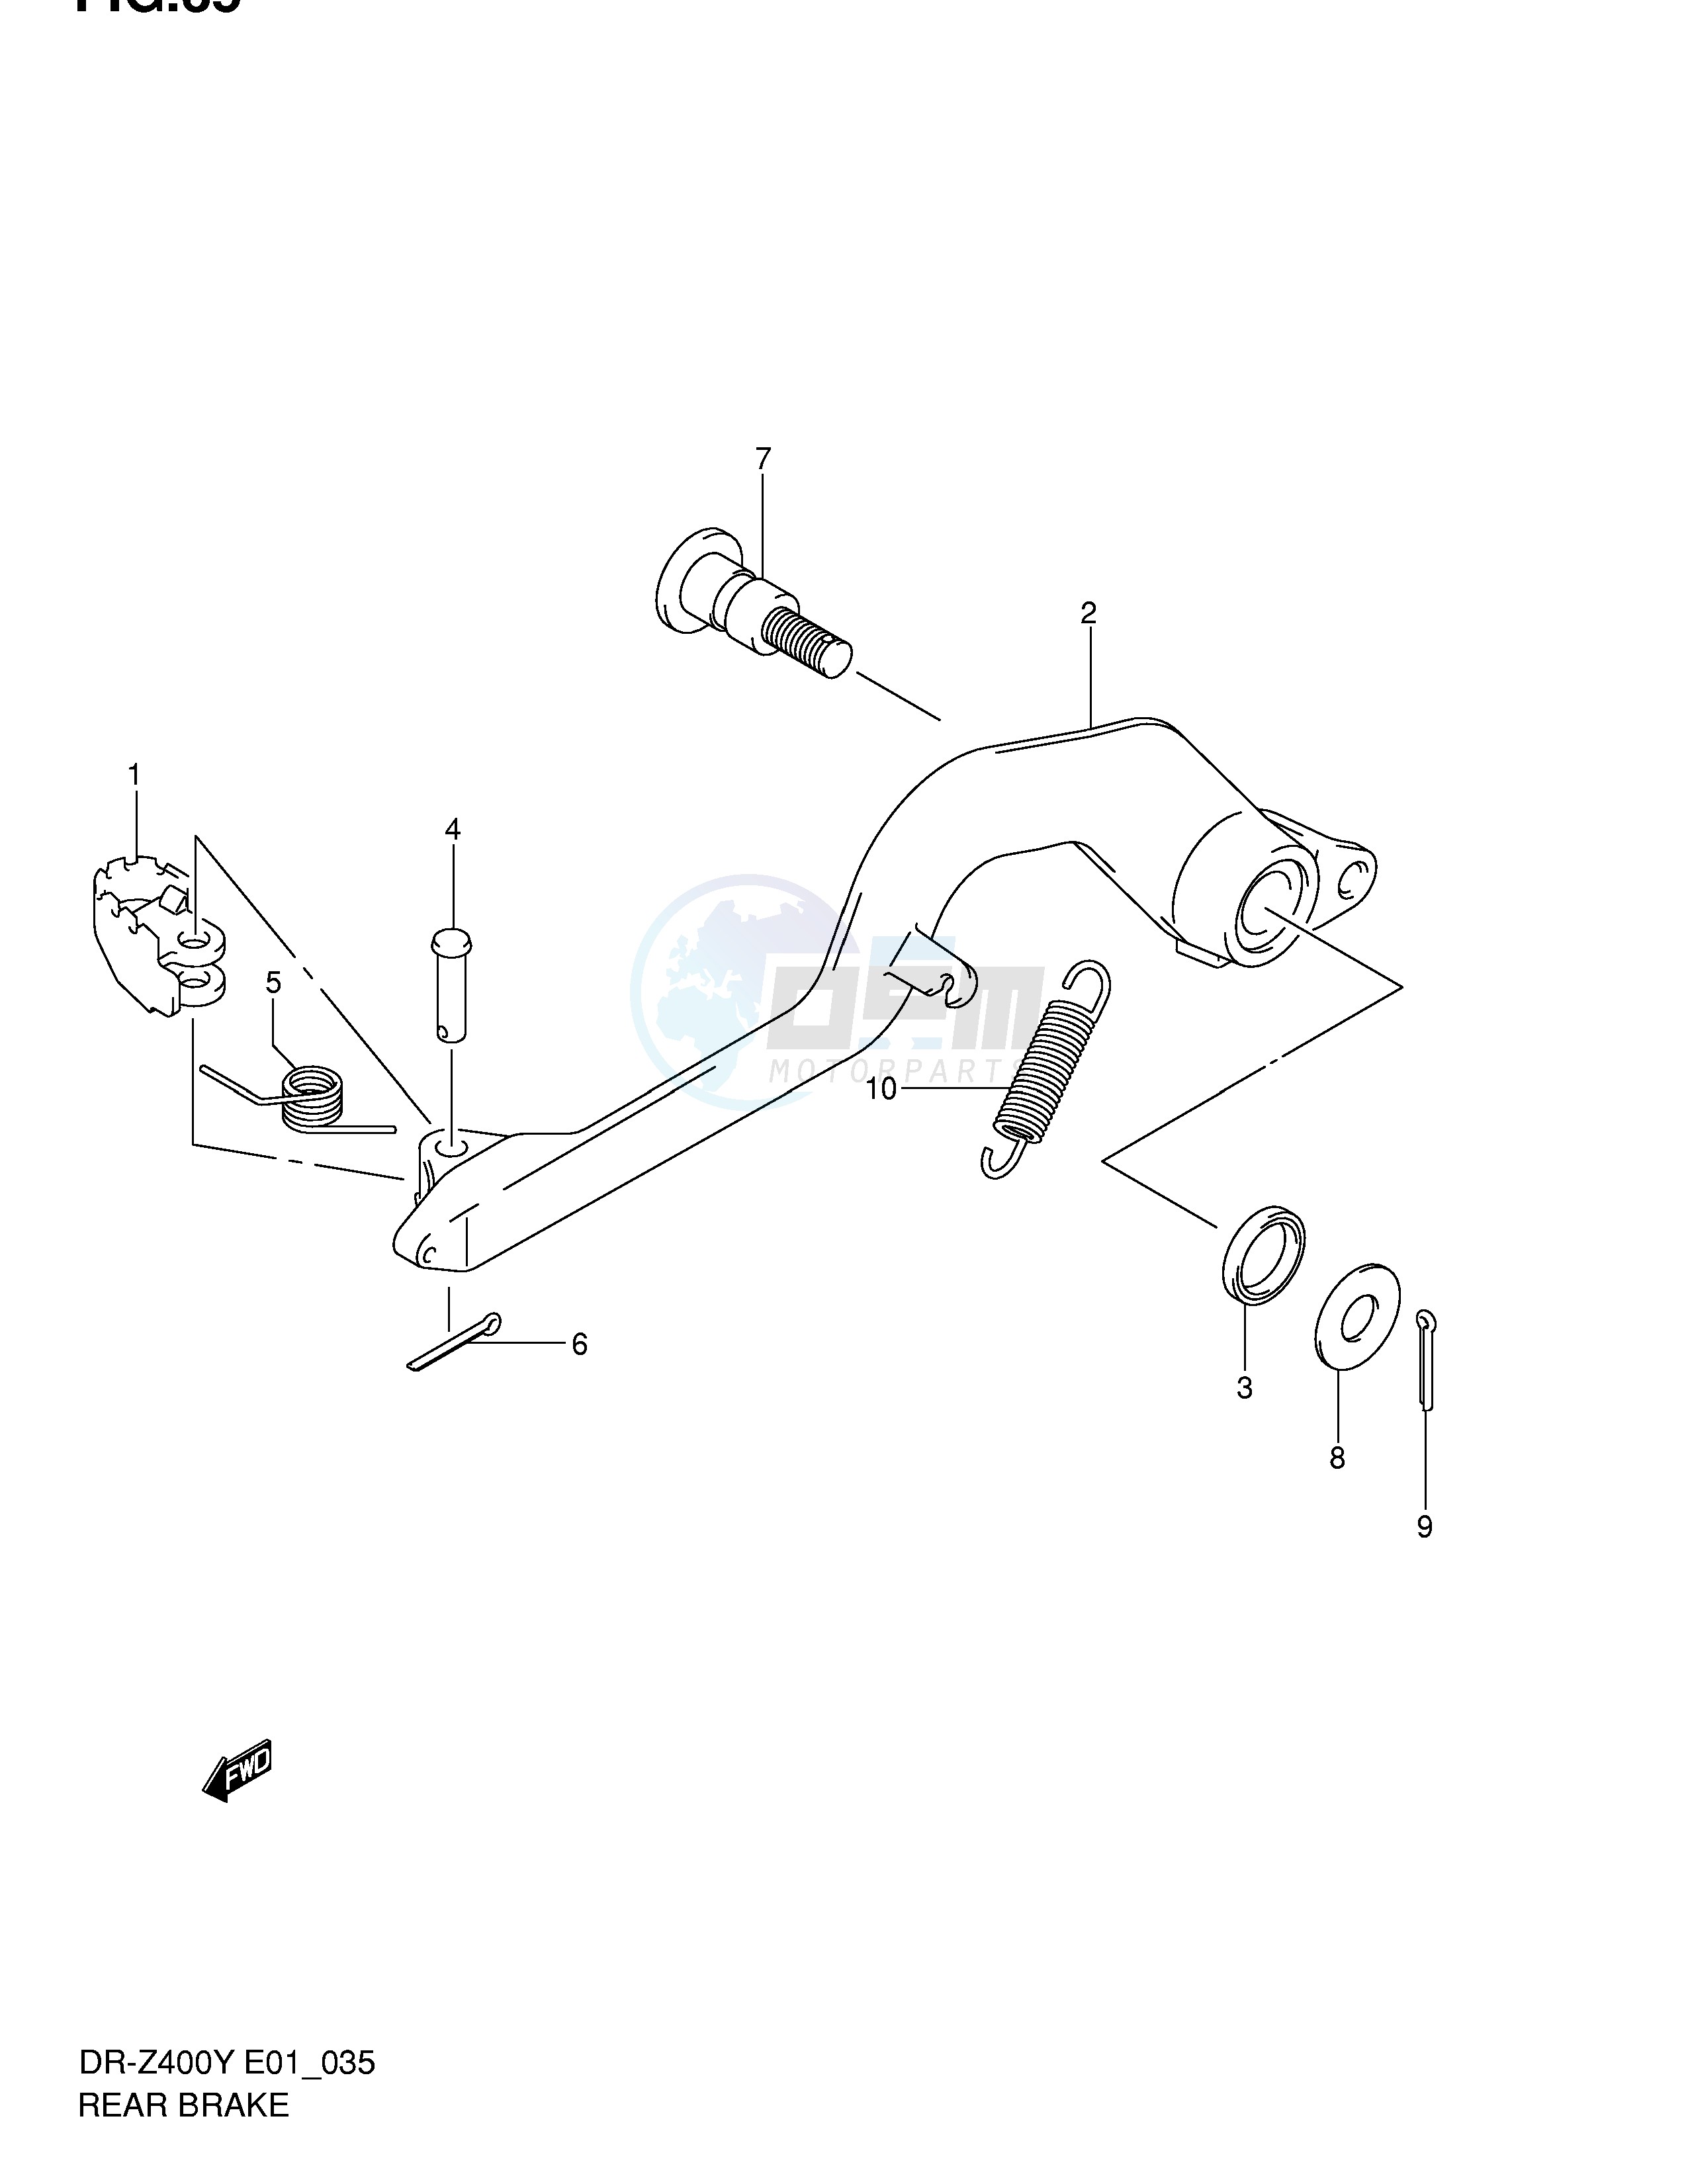 REAR BRAKE (WITH OUT E24) blueprint